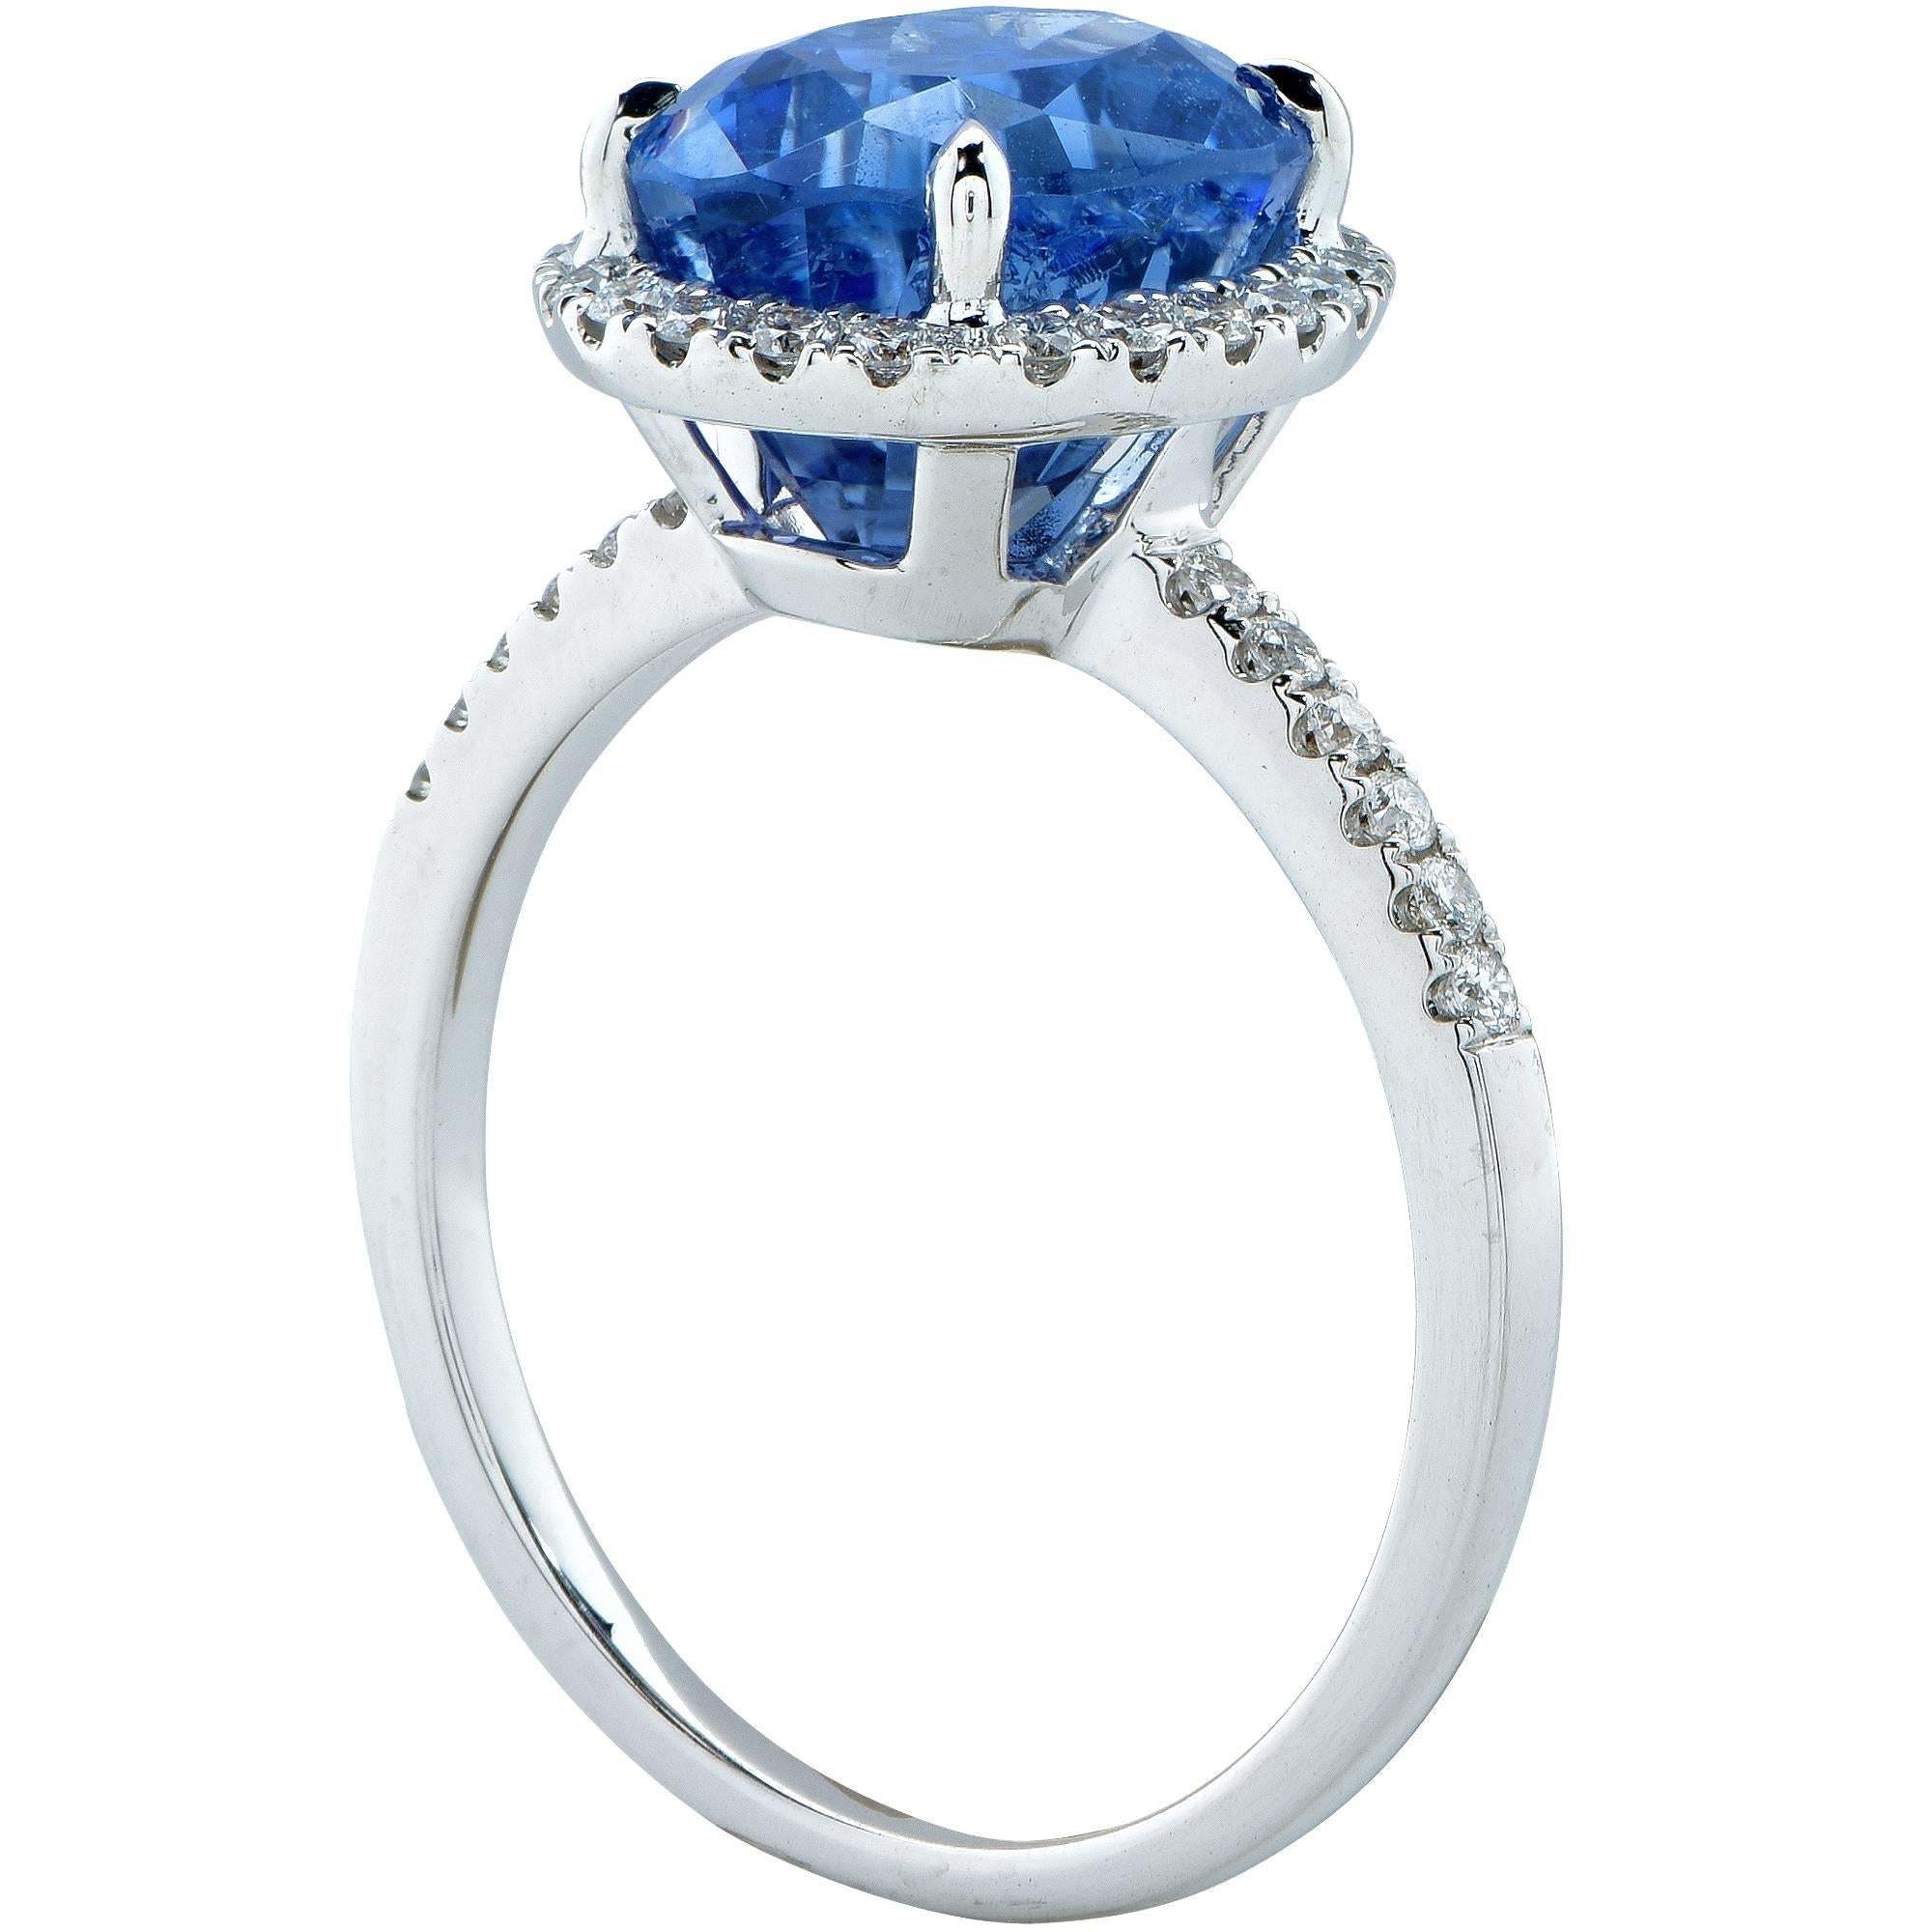 Gorgeous 18k white gold ring spotlighting a GIA graded oval cut no heat blue sapphire weighing 5.03cts surrounded by 30 round brilliant cut diamonds weighing approximately .30cts total G color VS-SI clarity.

The ring is a size 6 and can be sized up